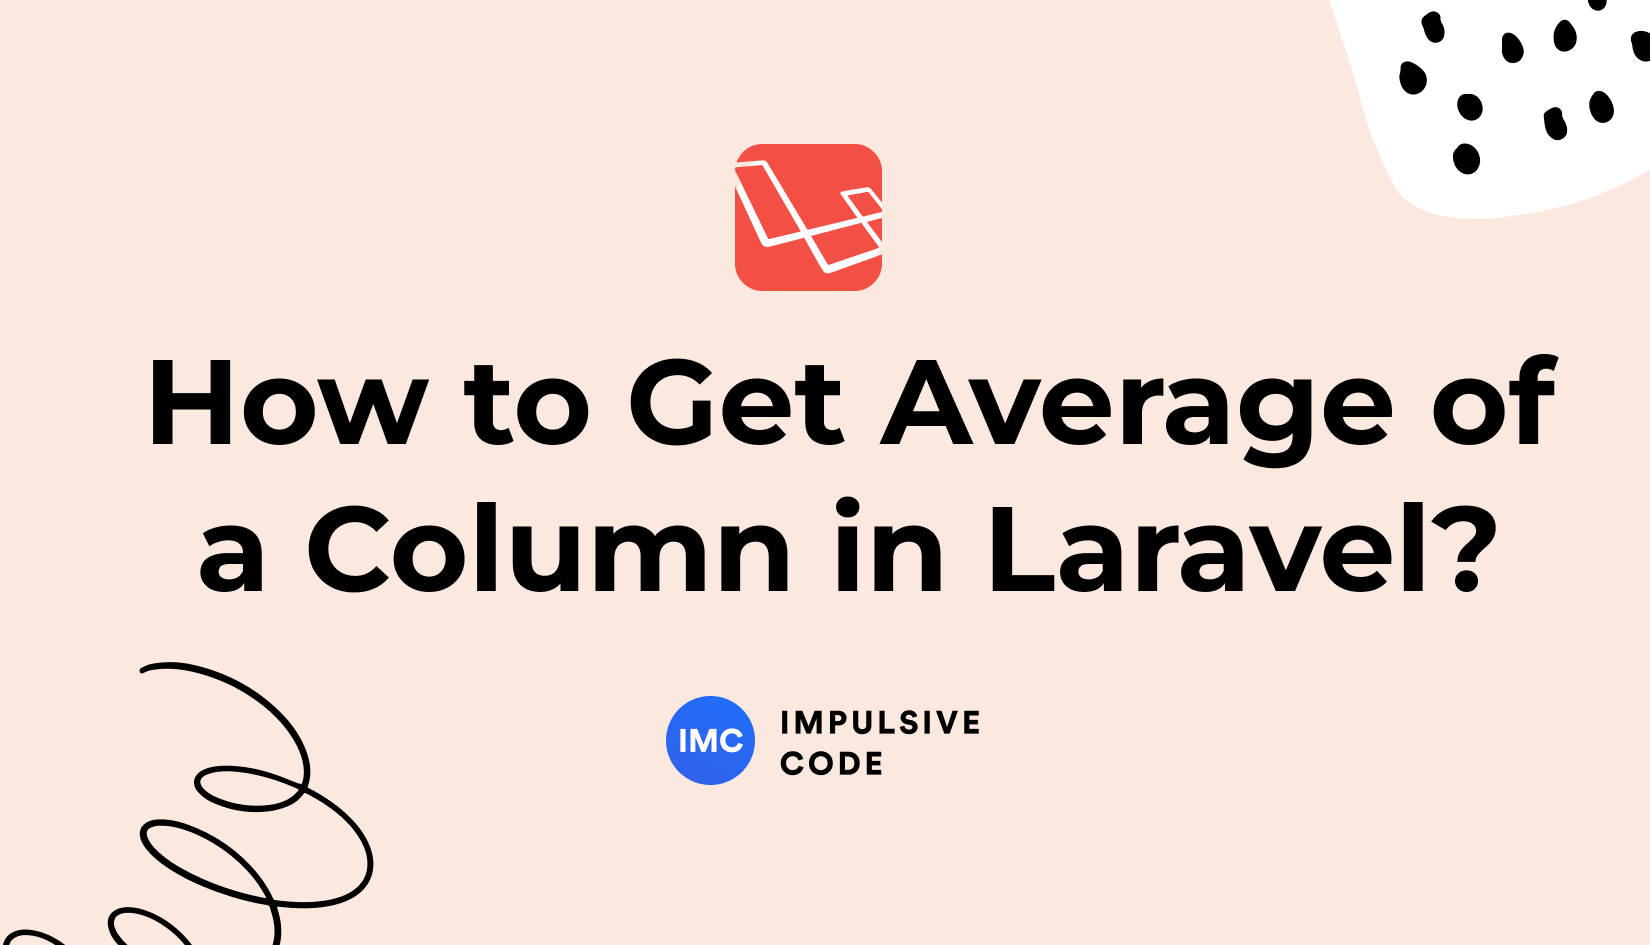 How to Get Average of a Column in Laravel?